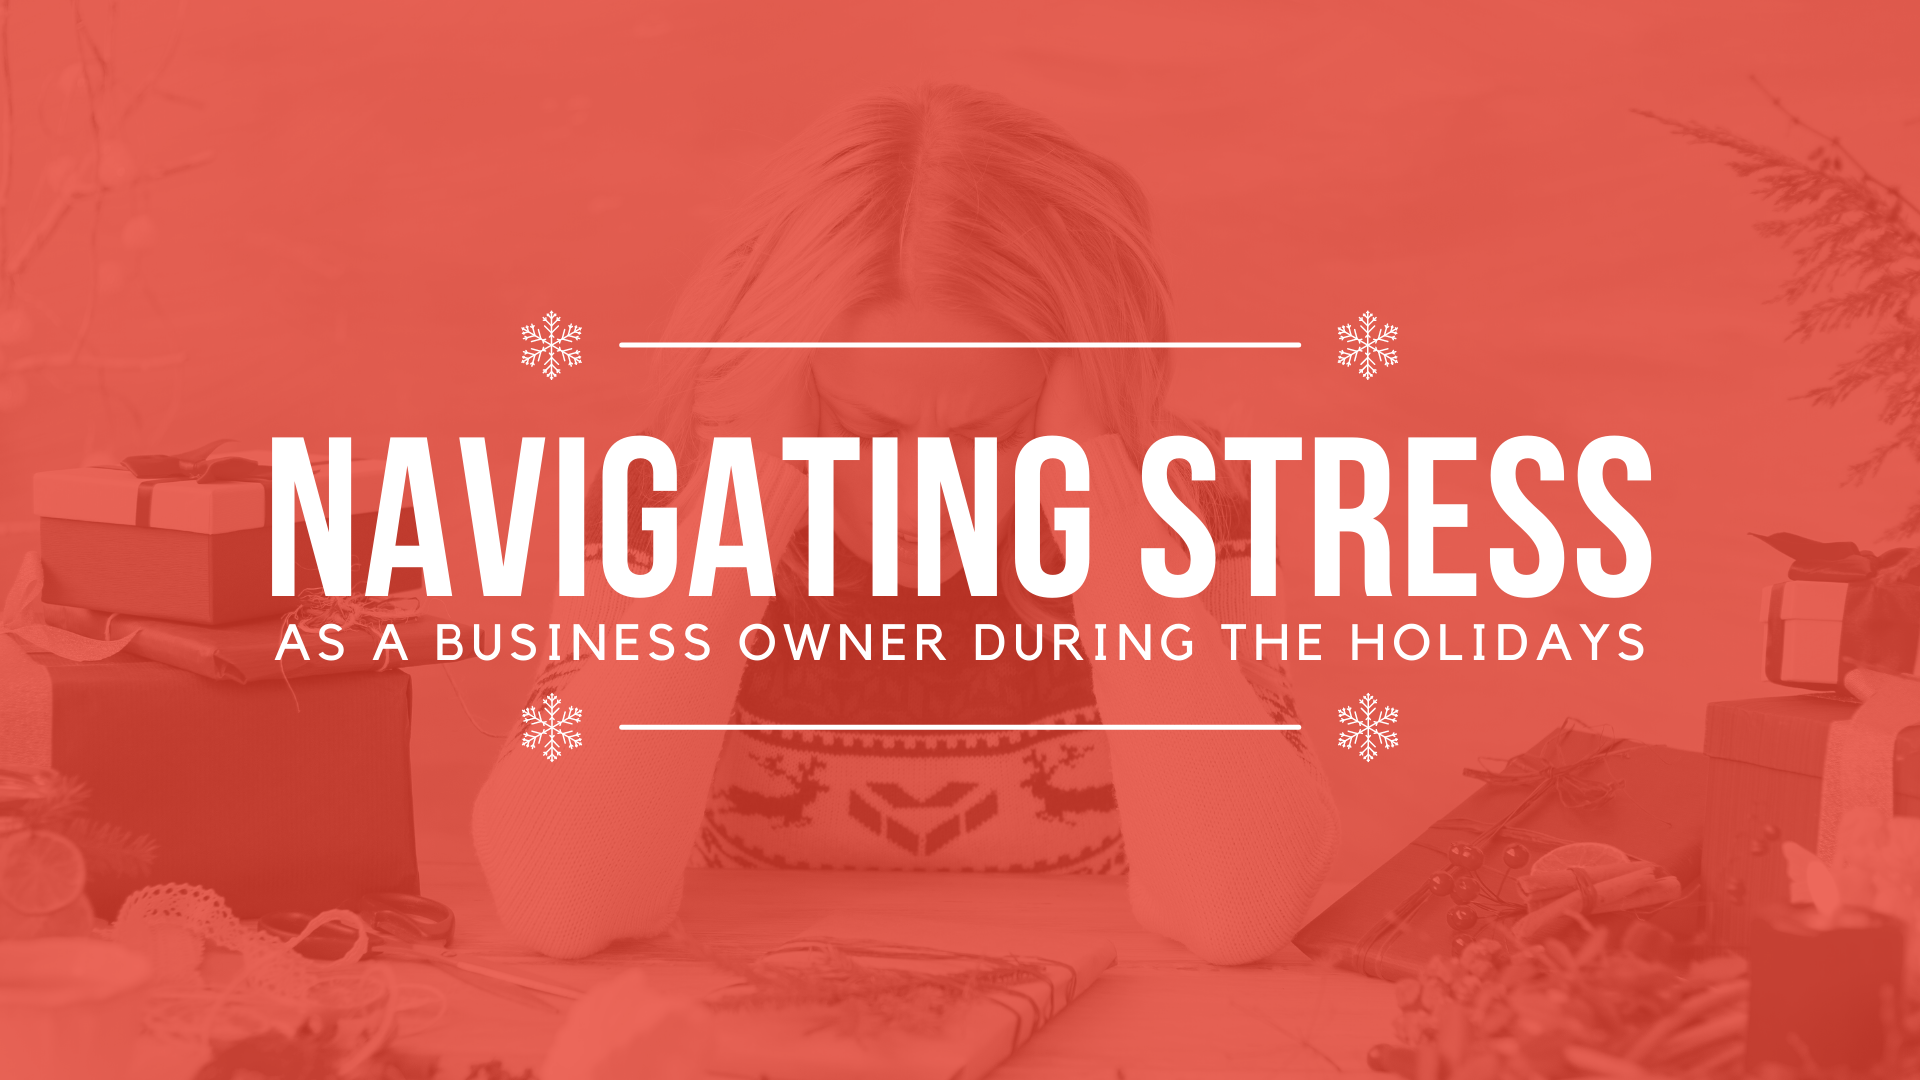 Navigating Stress as a Business Owner During the Holidays